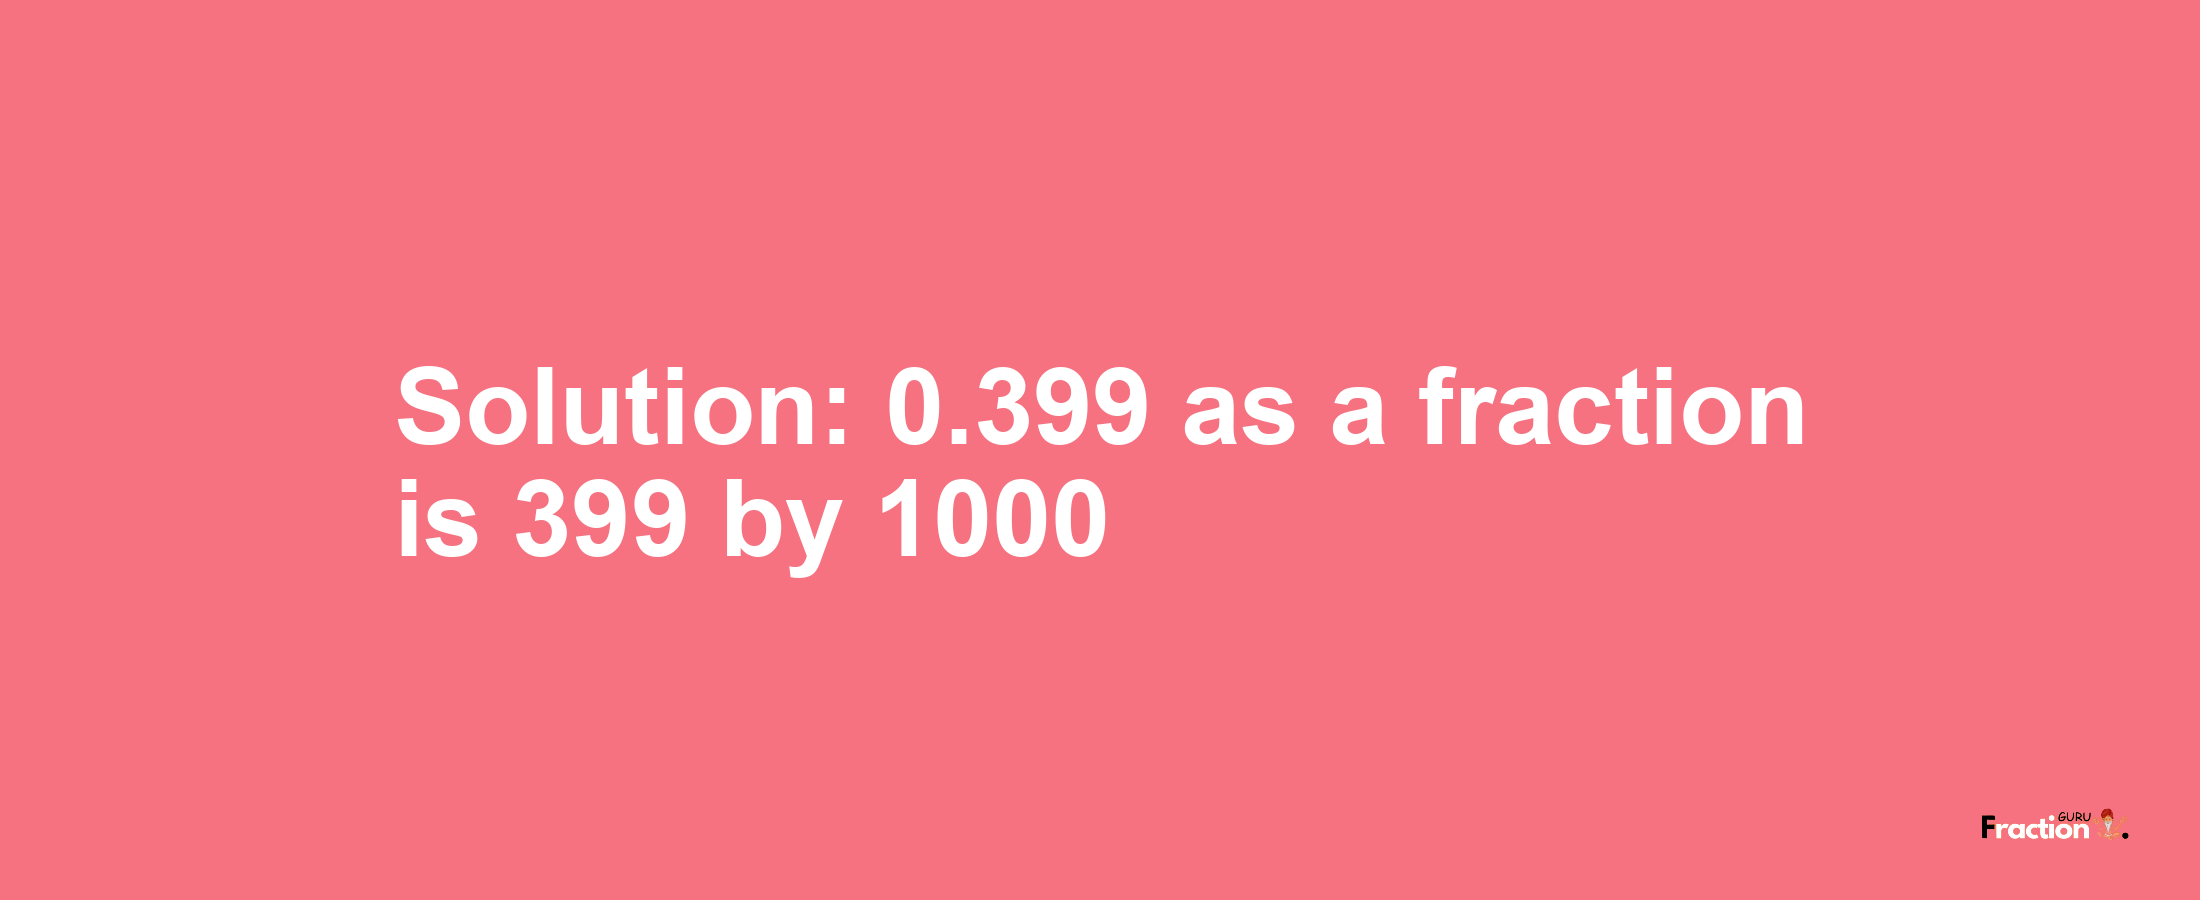 Solution:0.399 as a fraction is 399/1000